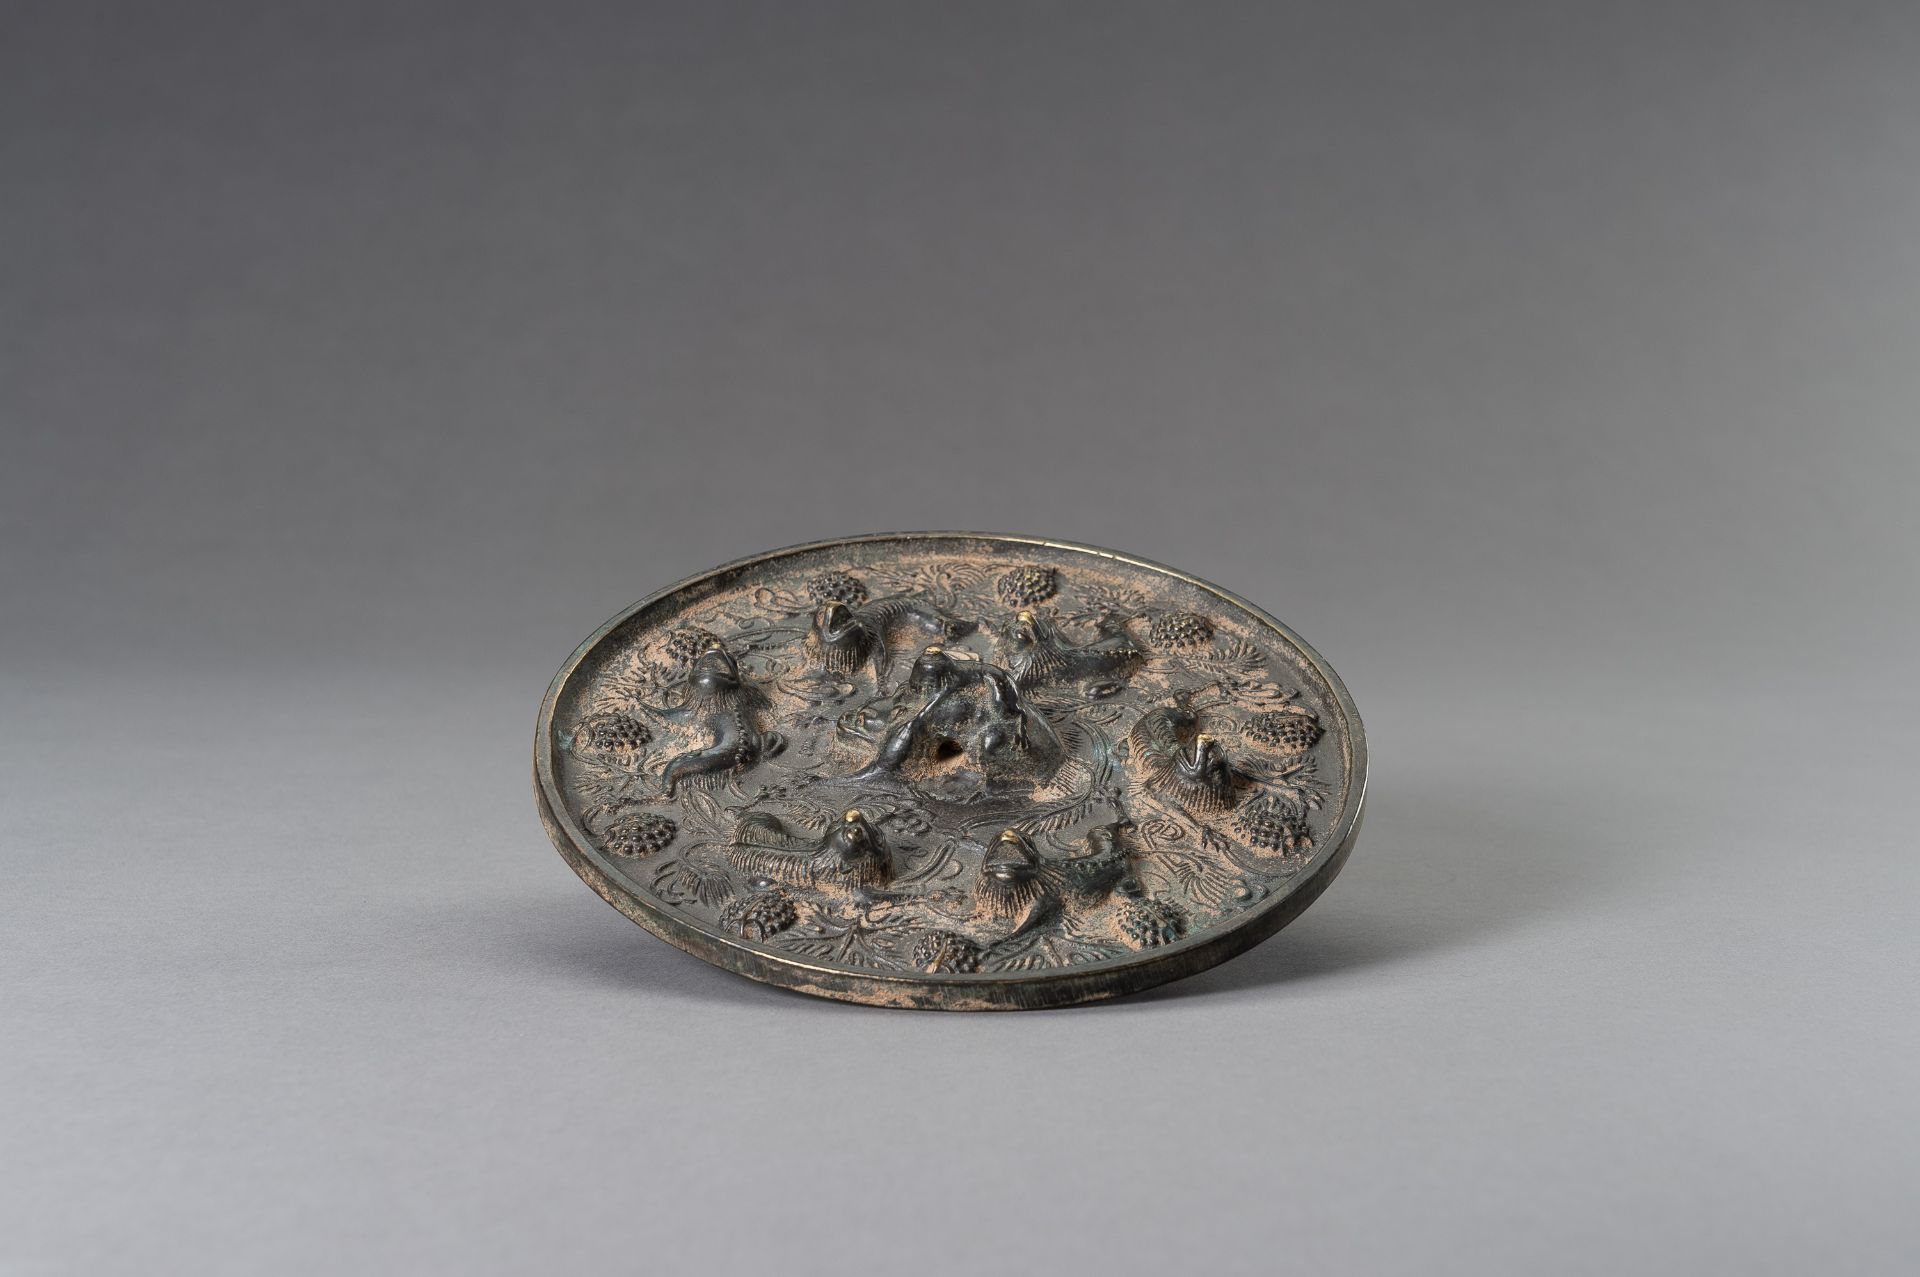 A TANG-STYLE BRONZE 'LIONS AND GRAPEVINES' MIRROR - Image 6 of 10